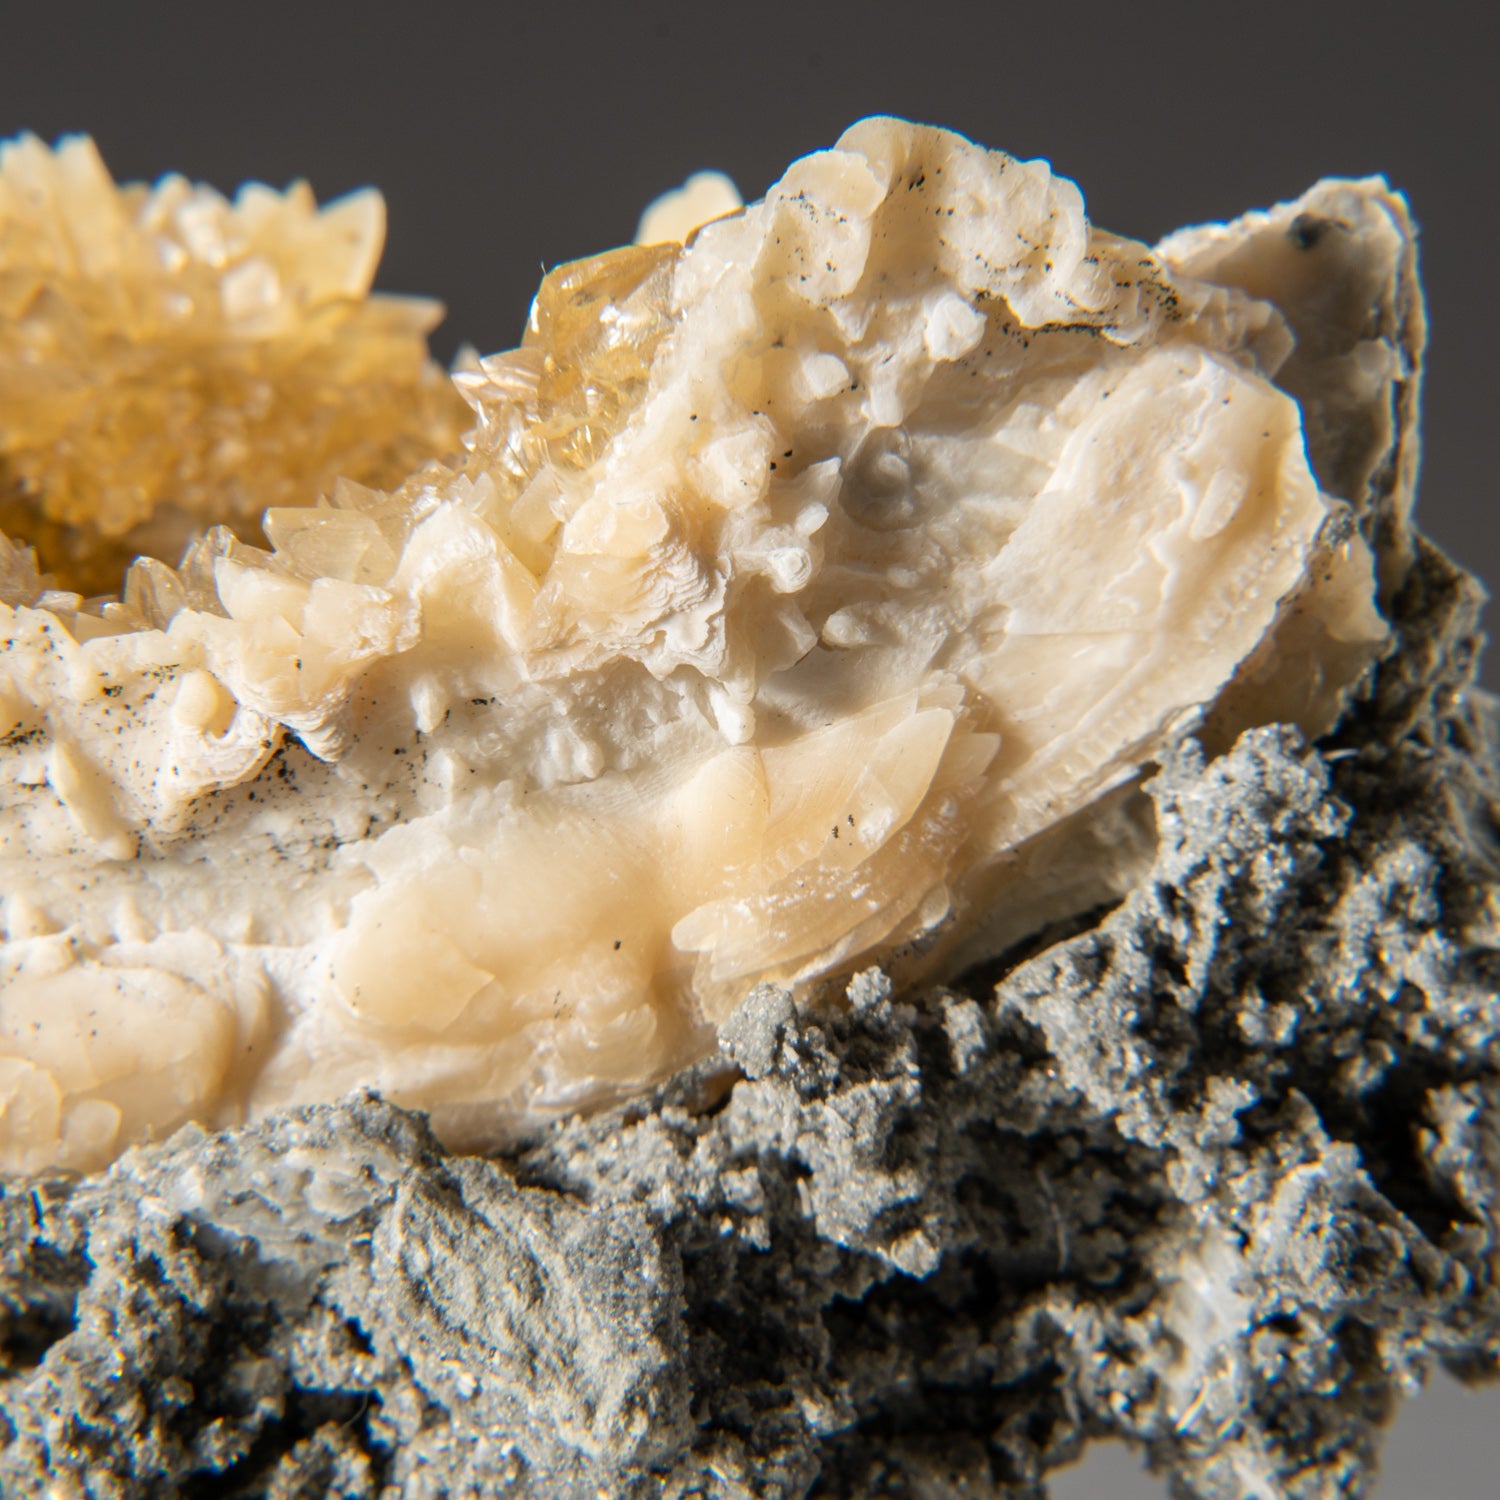 Calcite in Mercenaria Permagna from Ruck's Pit Quarry, Fort Drum, Okeechobee County, Florida USA